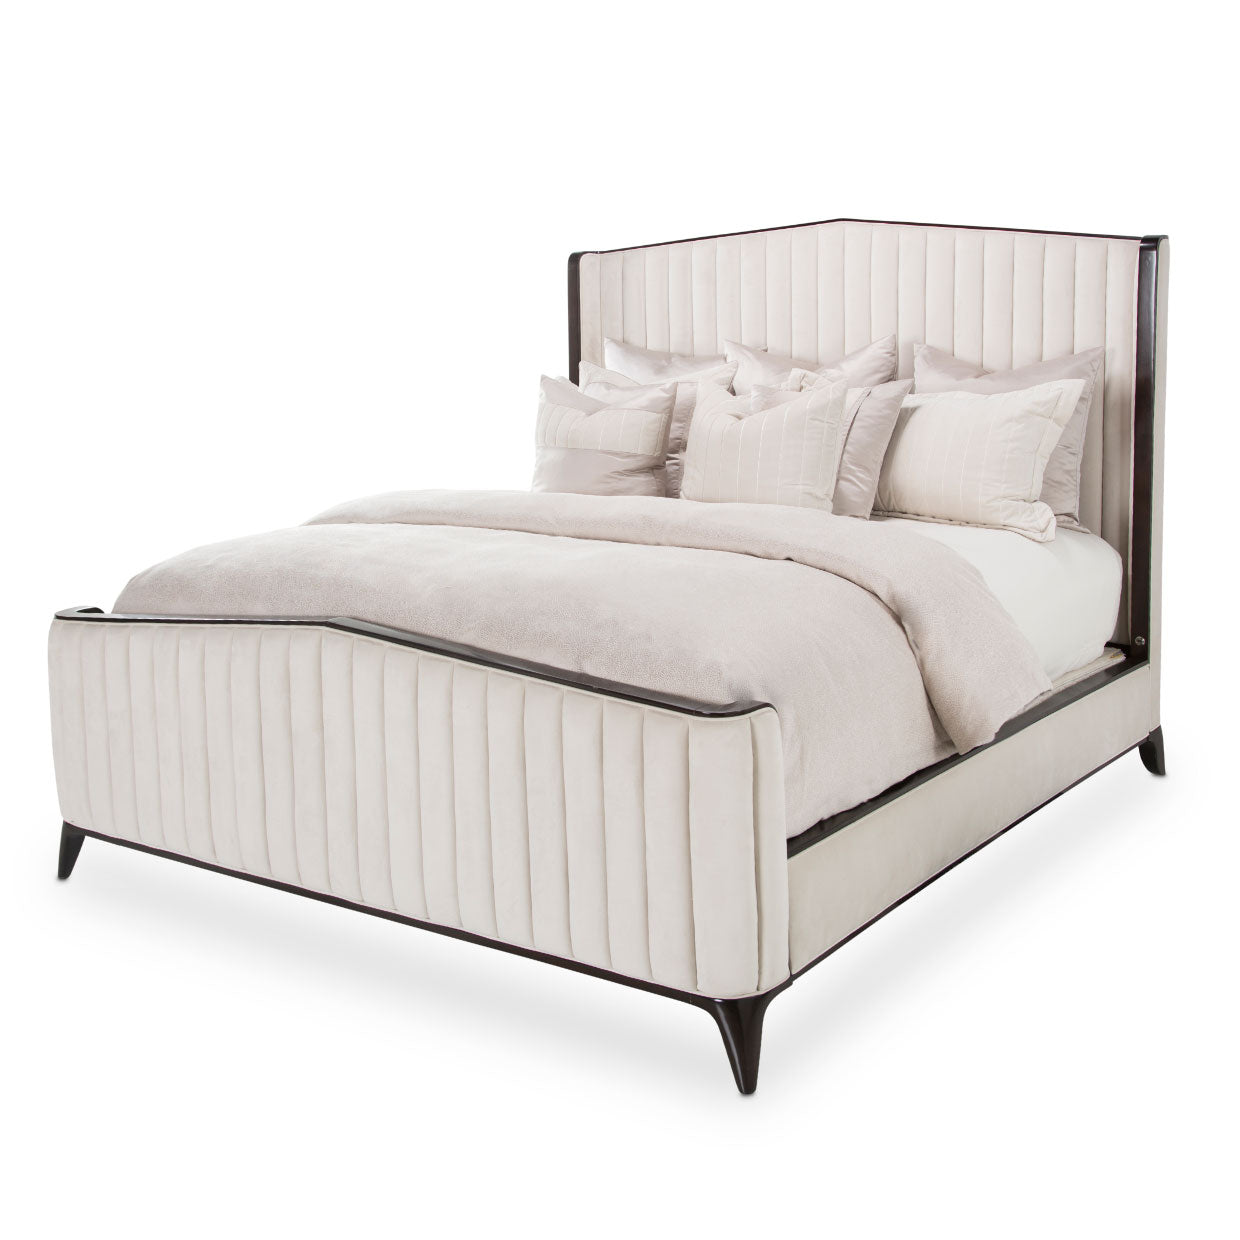 PARIS CHIC Cal King Tufted Panel Bed - Dreamart Gallery